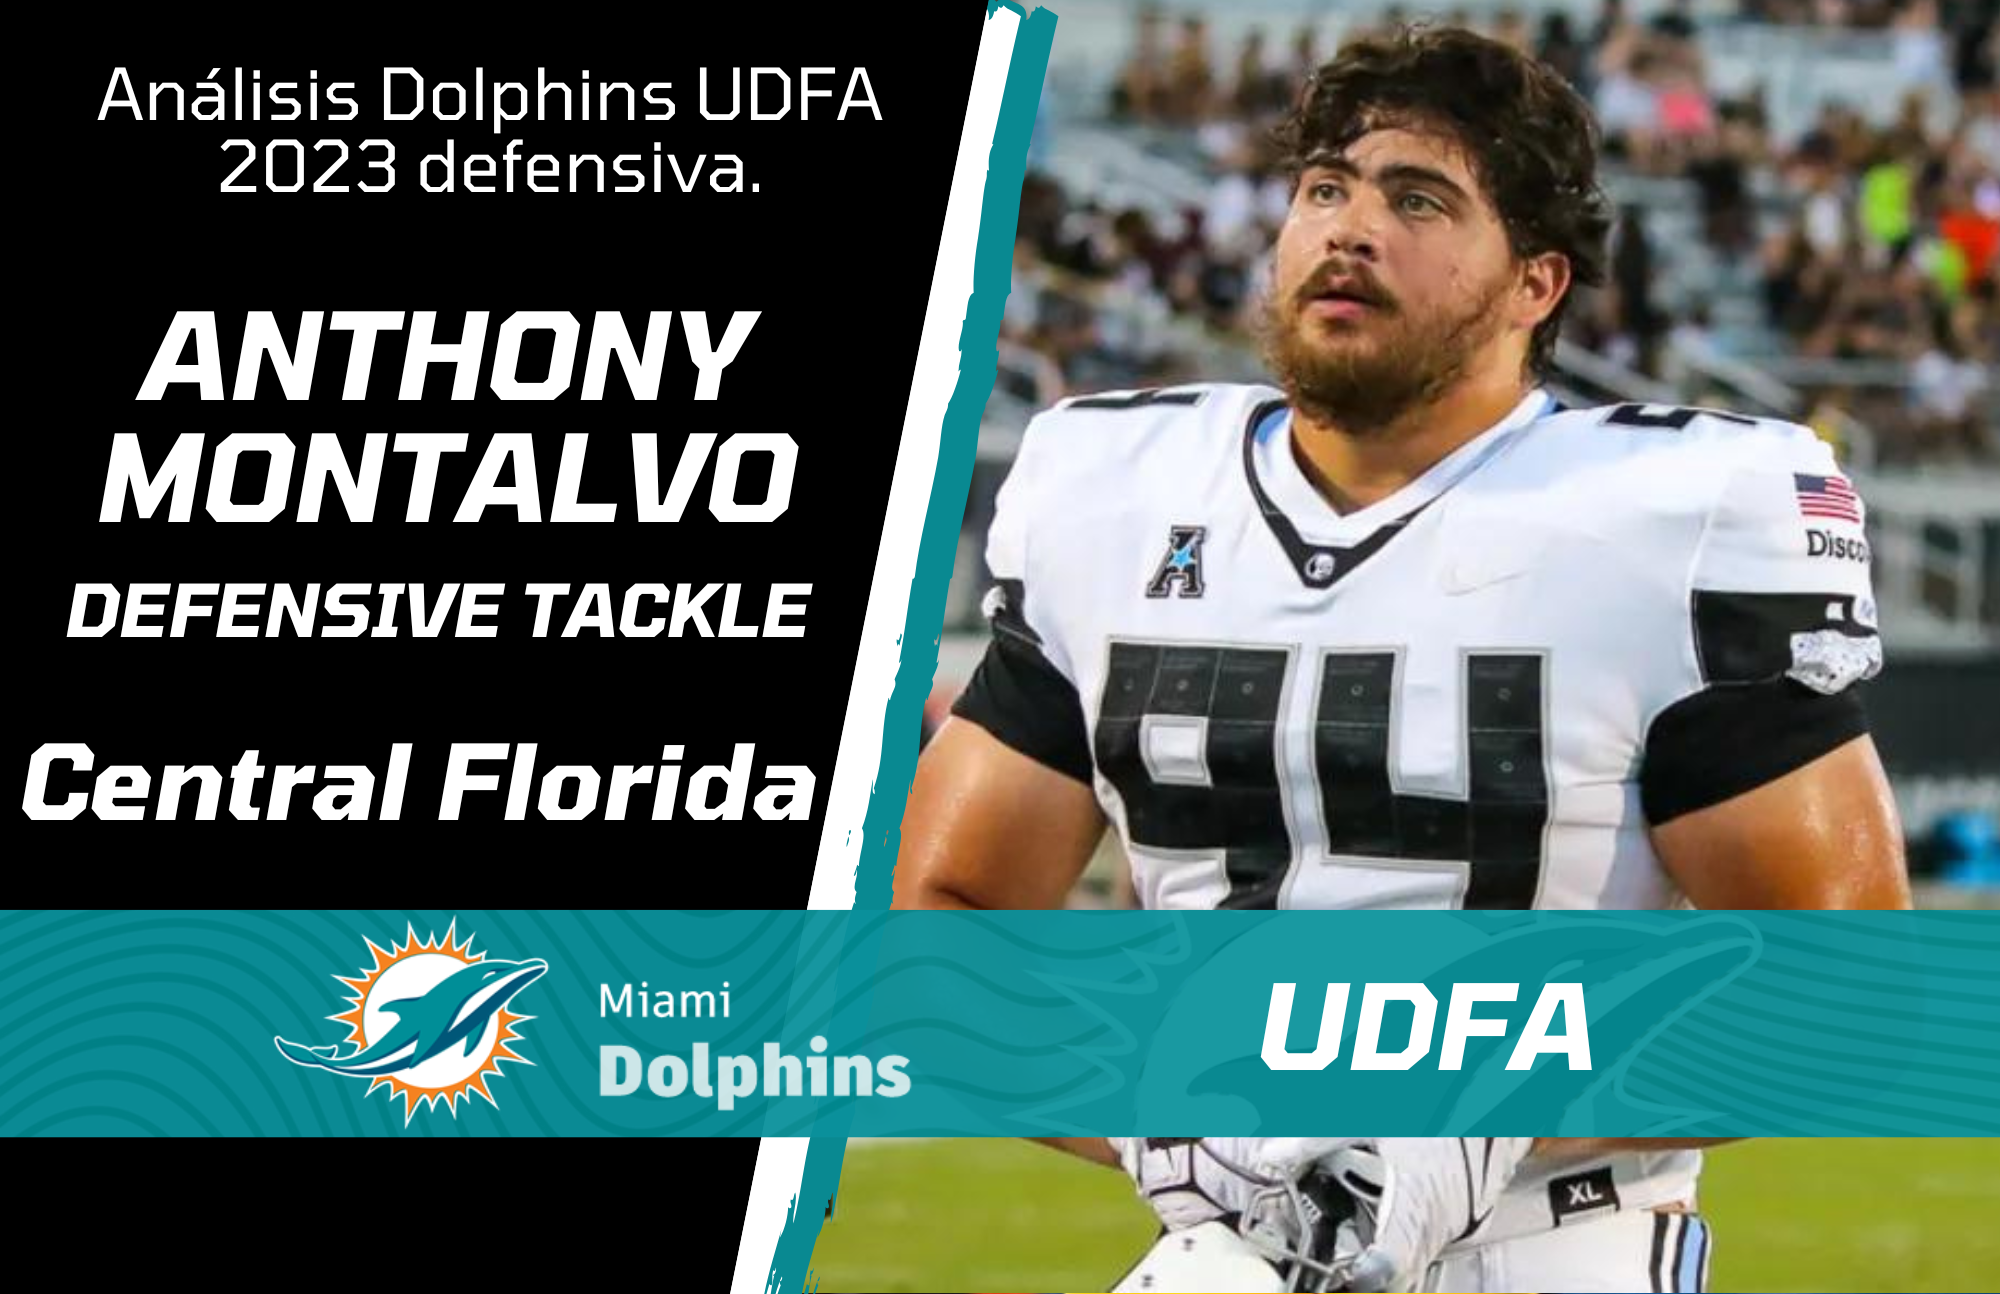 UCF defensive tackle Anthony Montalvo, UCF Football: Anthony Montalvo, UCF DT Anthony Montalvo sing Miami Dolphins, UDFA Miami Dolphins Tracker 